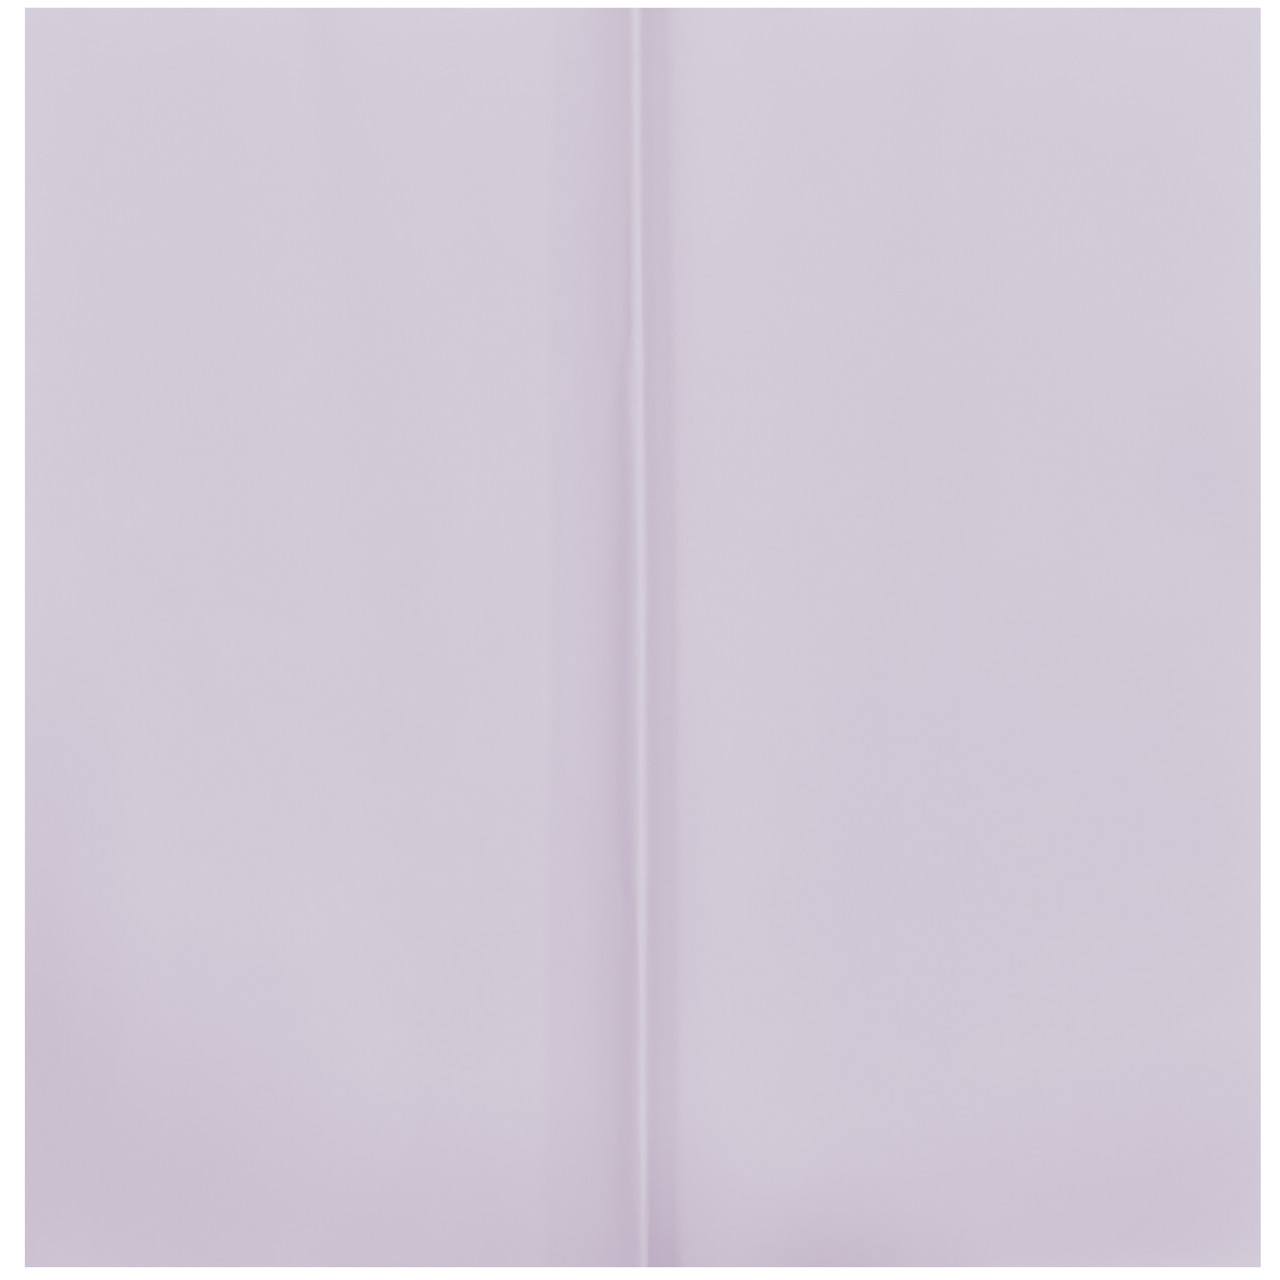 Lavender Floral Wrapping Paper - 20 Sheets